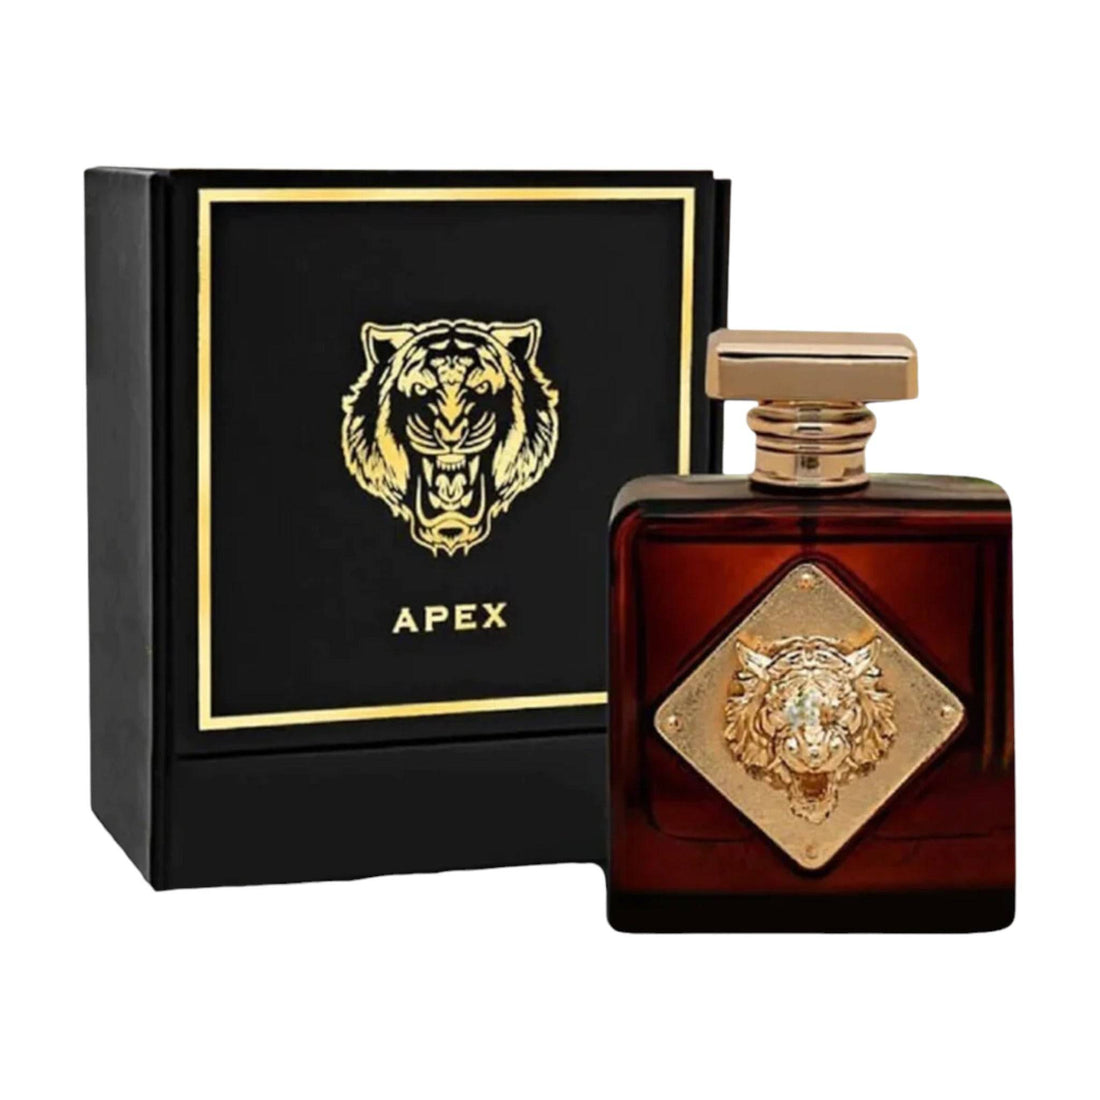 Sophisticated 100ml bottle of Apex Eau De Parfum by Fragrance World, representing its spicy and enchanting character.